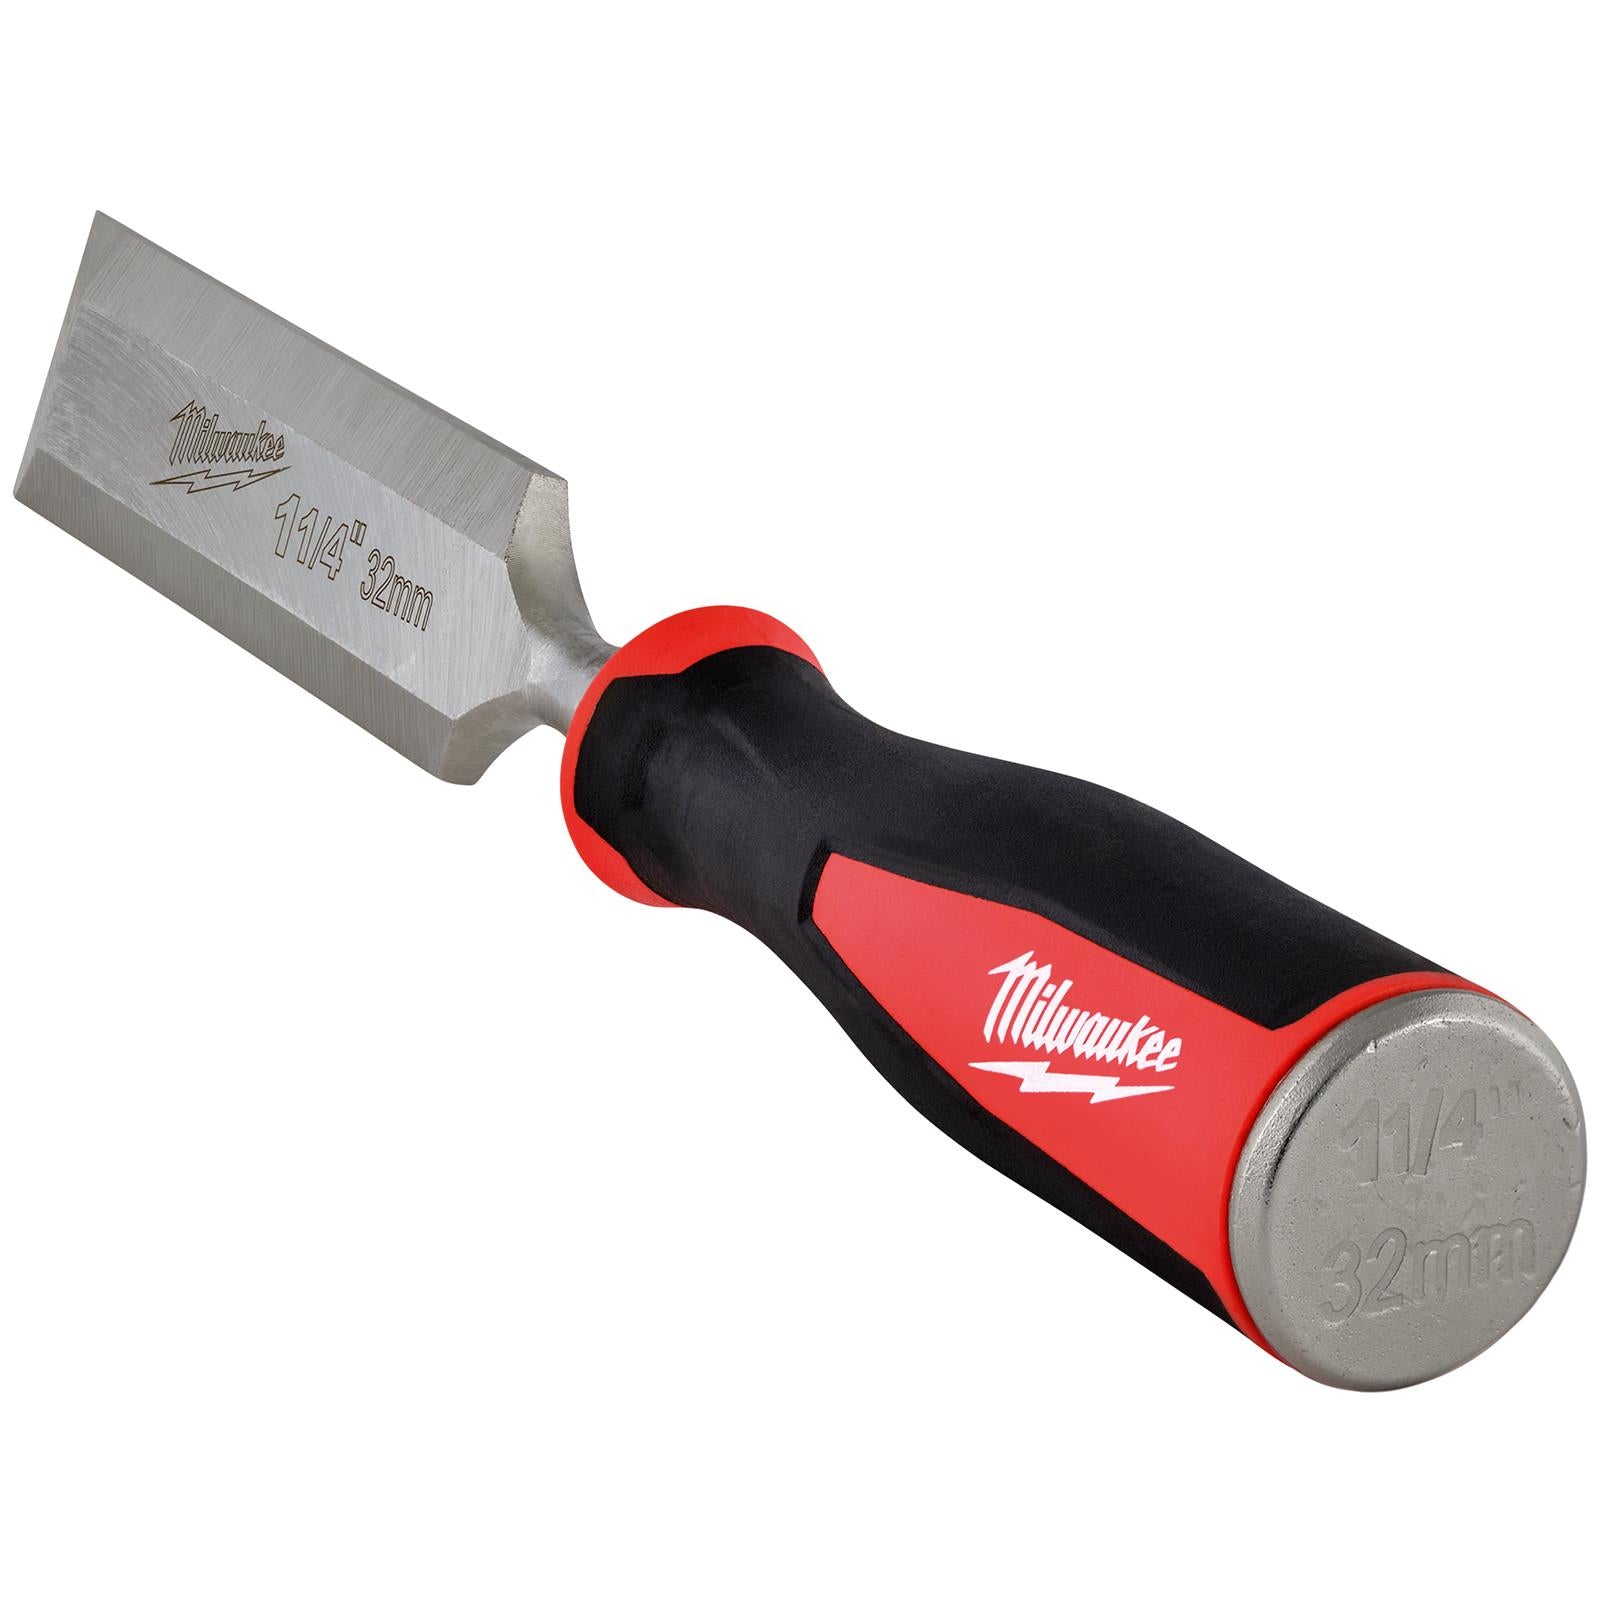 Milwaukee Beveled Edge Wood Chisel 32mm 1-1/4" All Metal Core with Striking Cap